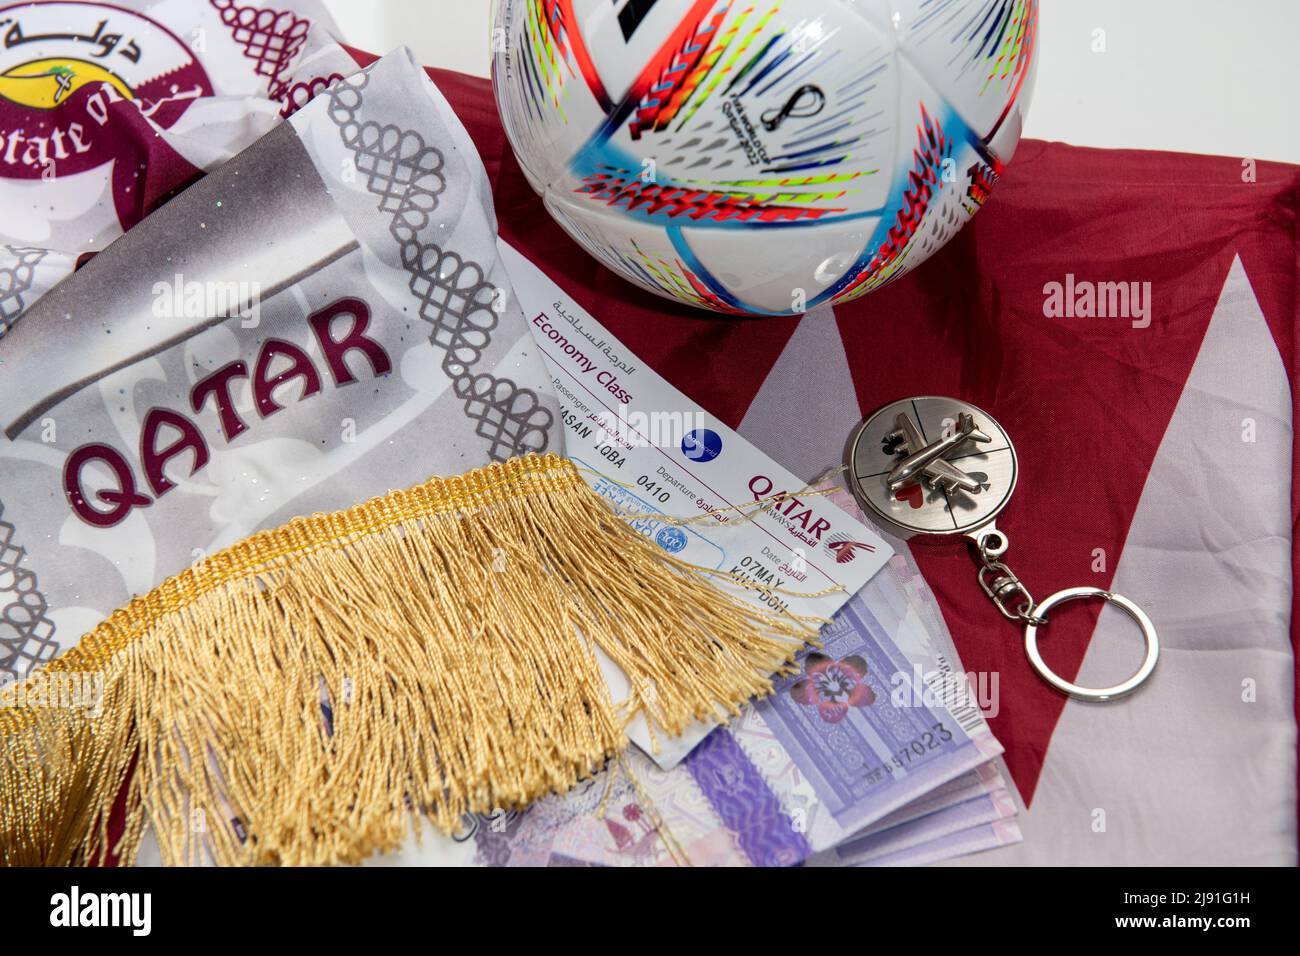 Qatar Fifa Football world cup travel plane. Sports and travel concept Stock Photo